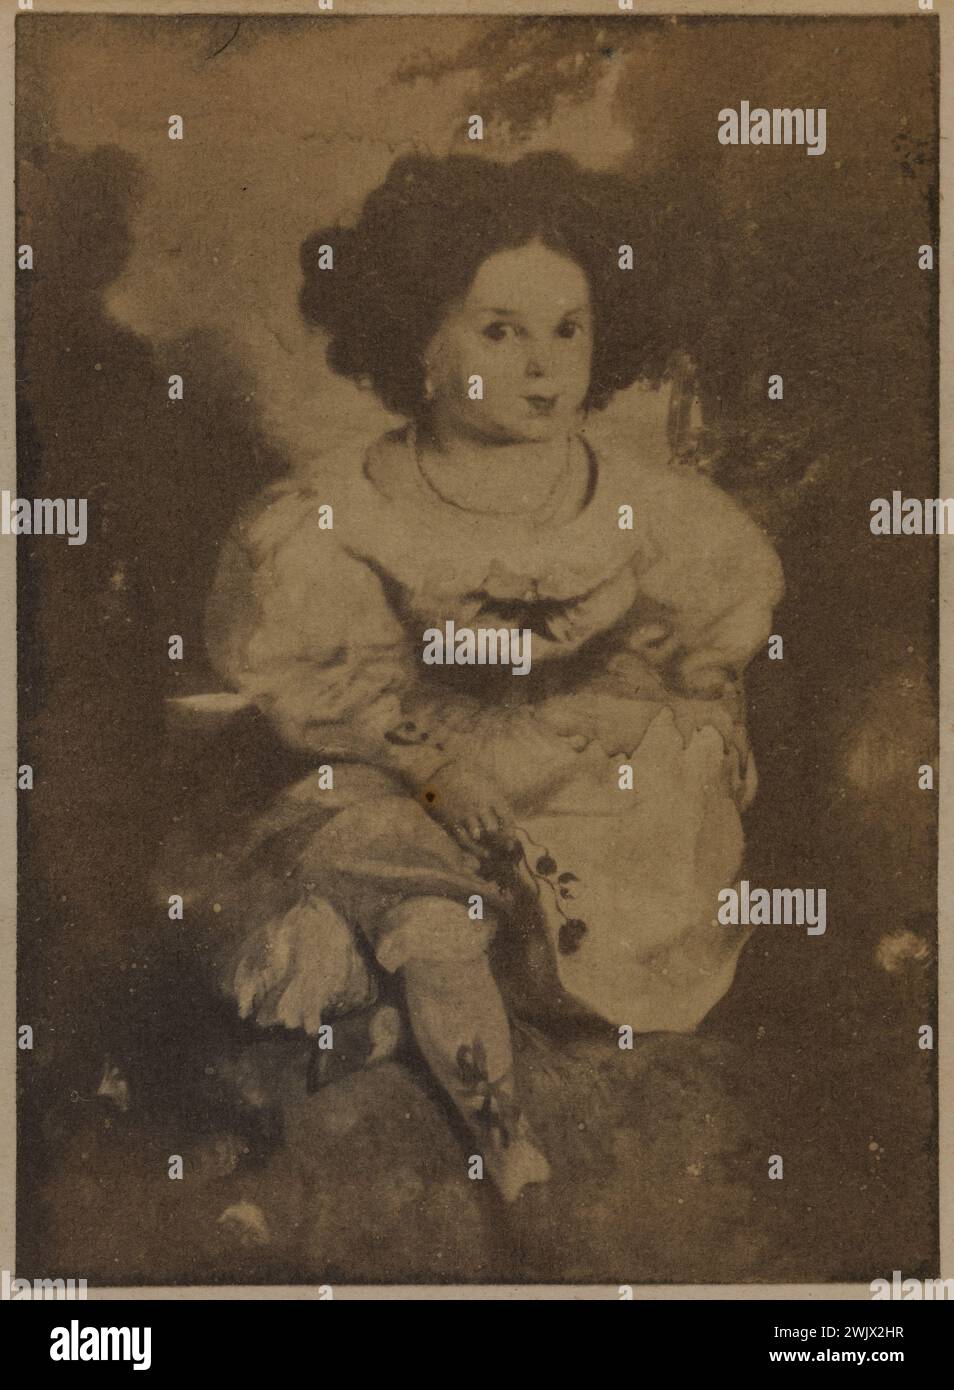 Léopoldine H. '. Photography of Auguste Vacquerie (1819-1895). According to a painting by Louis Boulanger:' Léopoldine at the age of 4 ', extracted from the collection of articles entitled' Profiles and grimaces ' Auguste Vacquerie). Print on salted paper. 1853. Paris, house of Victor Hugo. Stock Photo